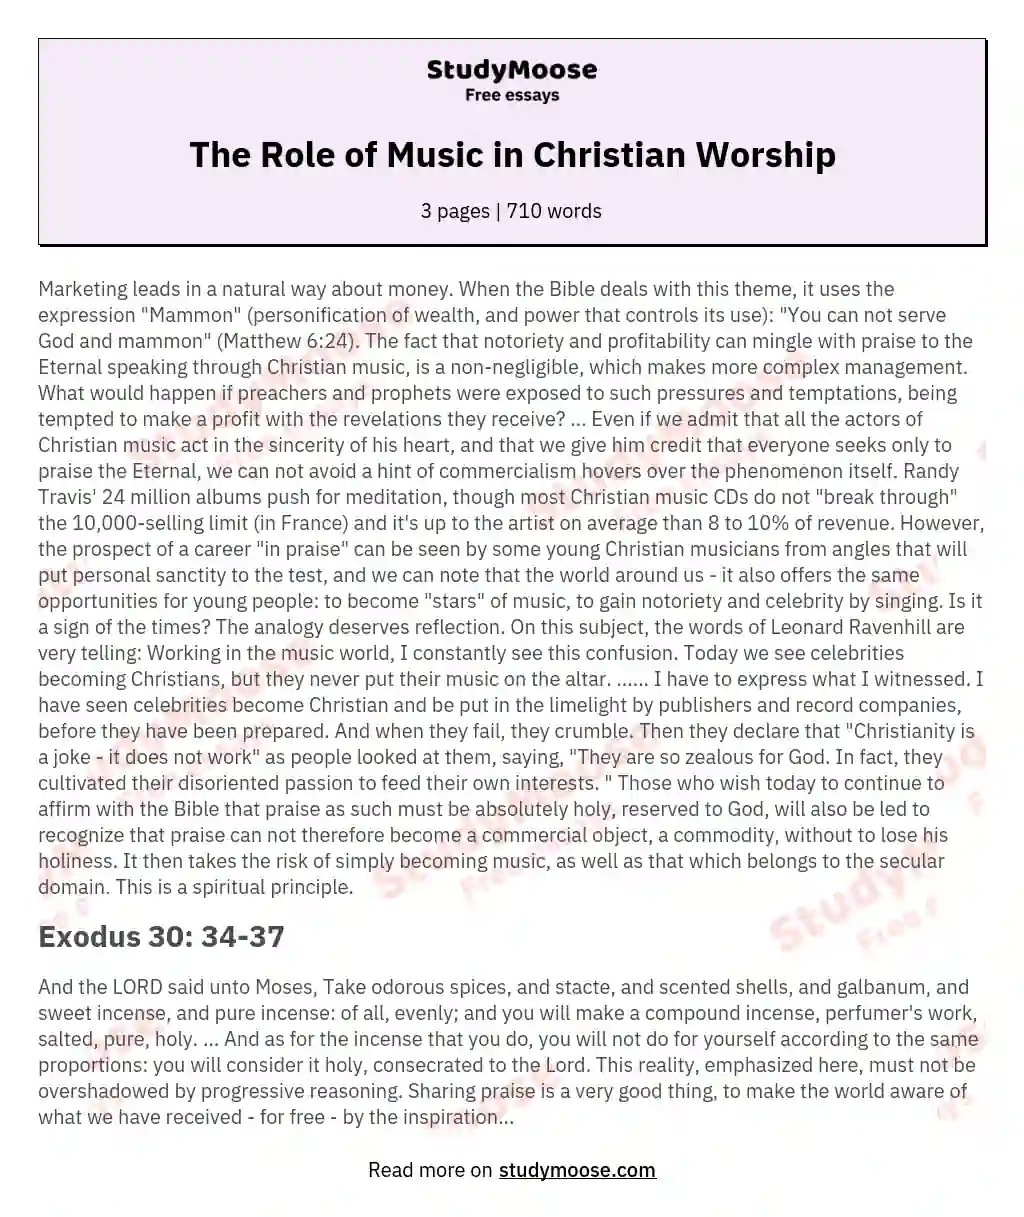 The Role of Music in Christian Worship essay